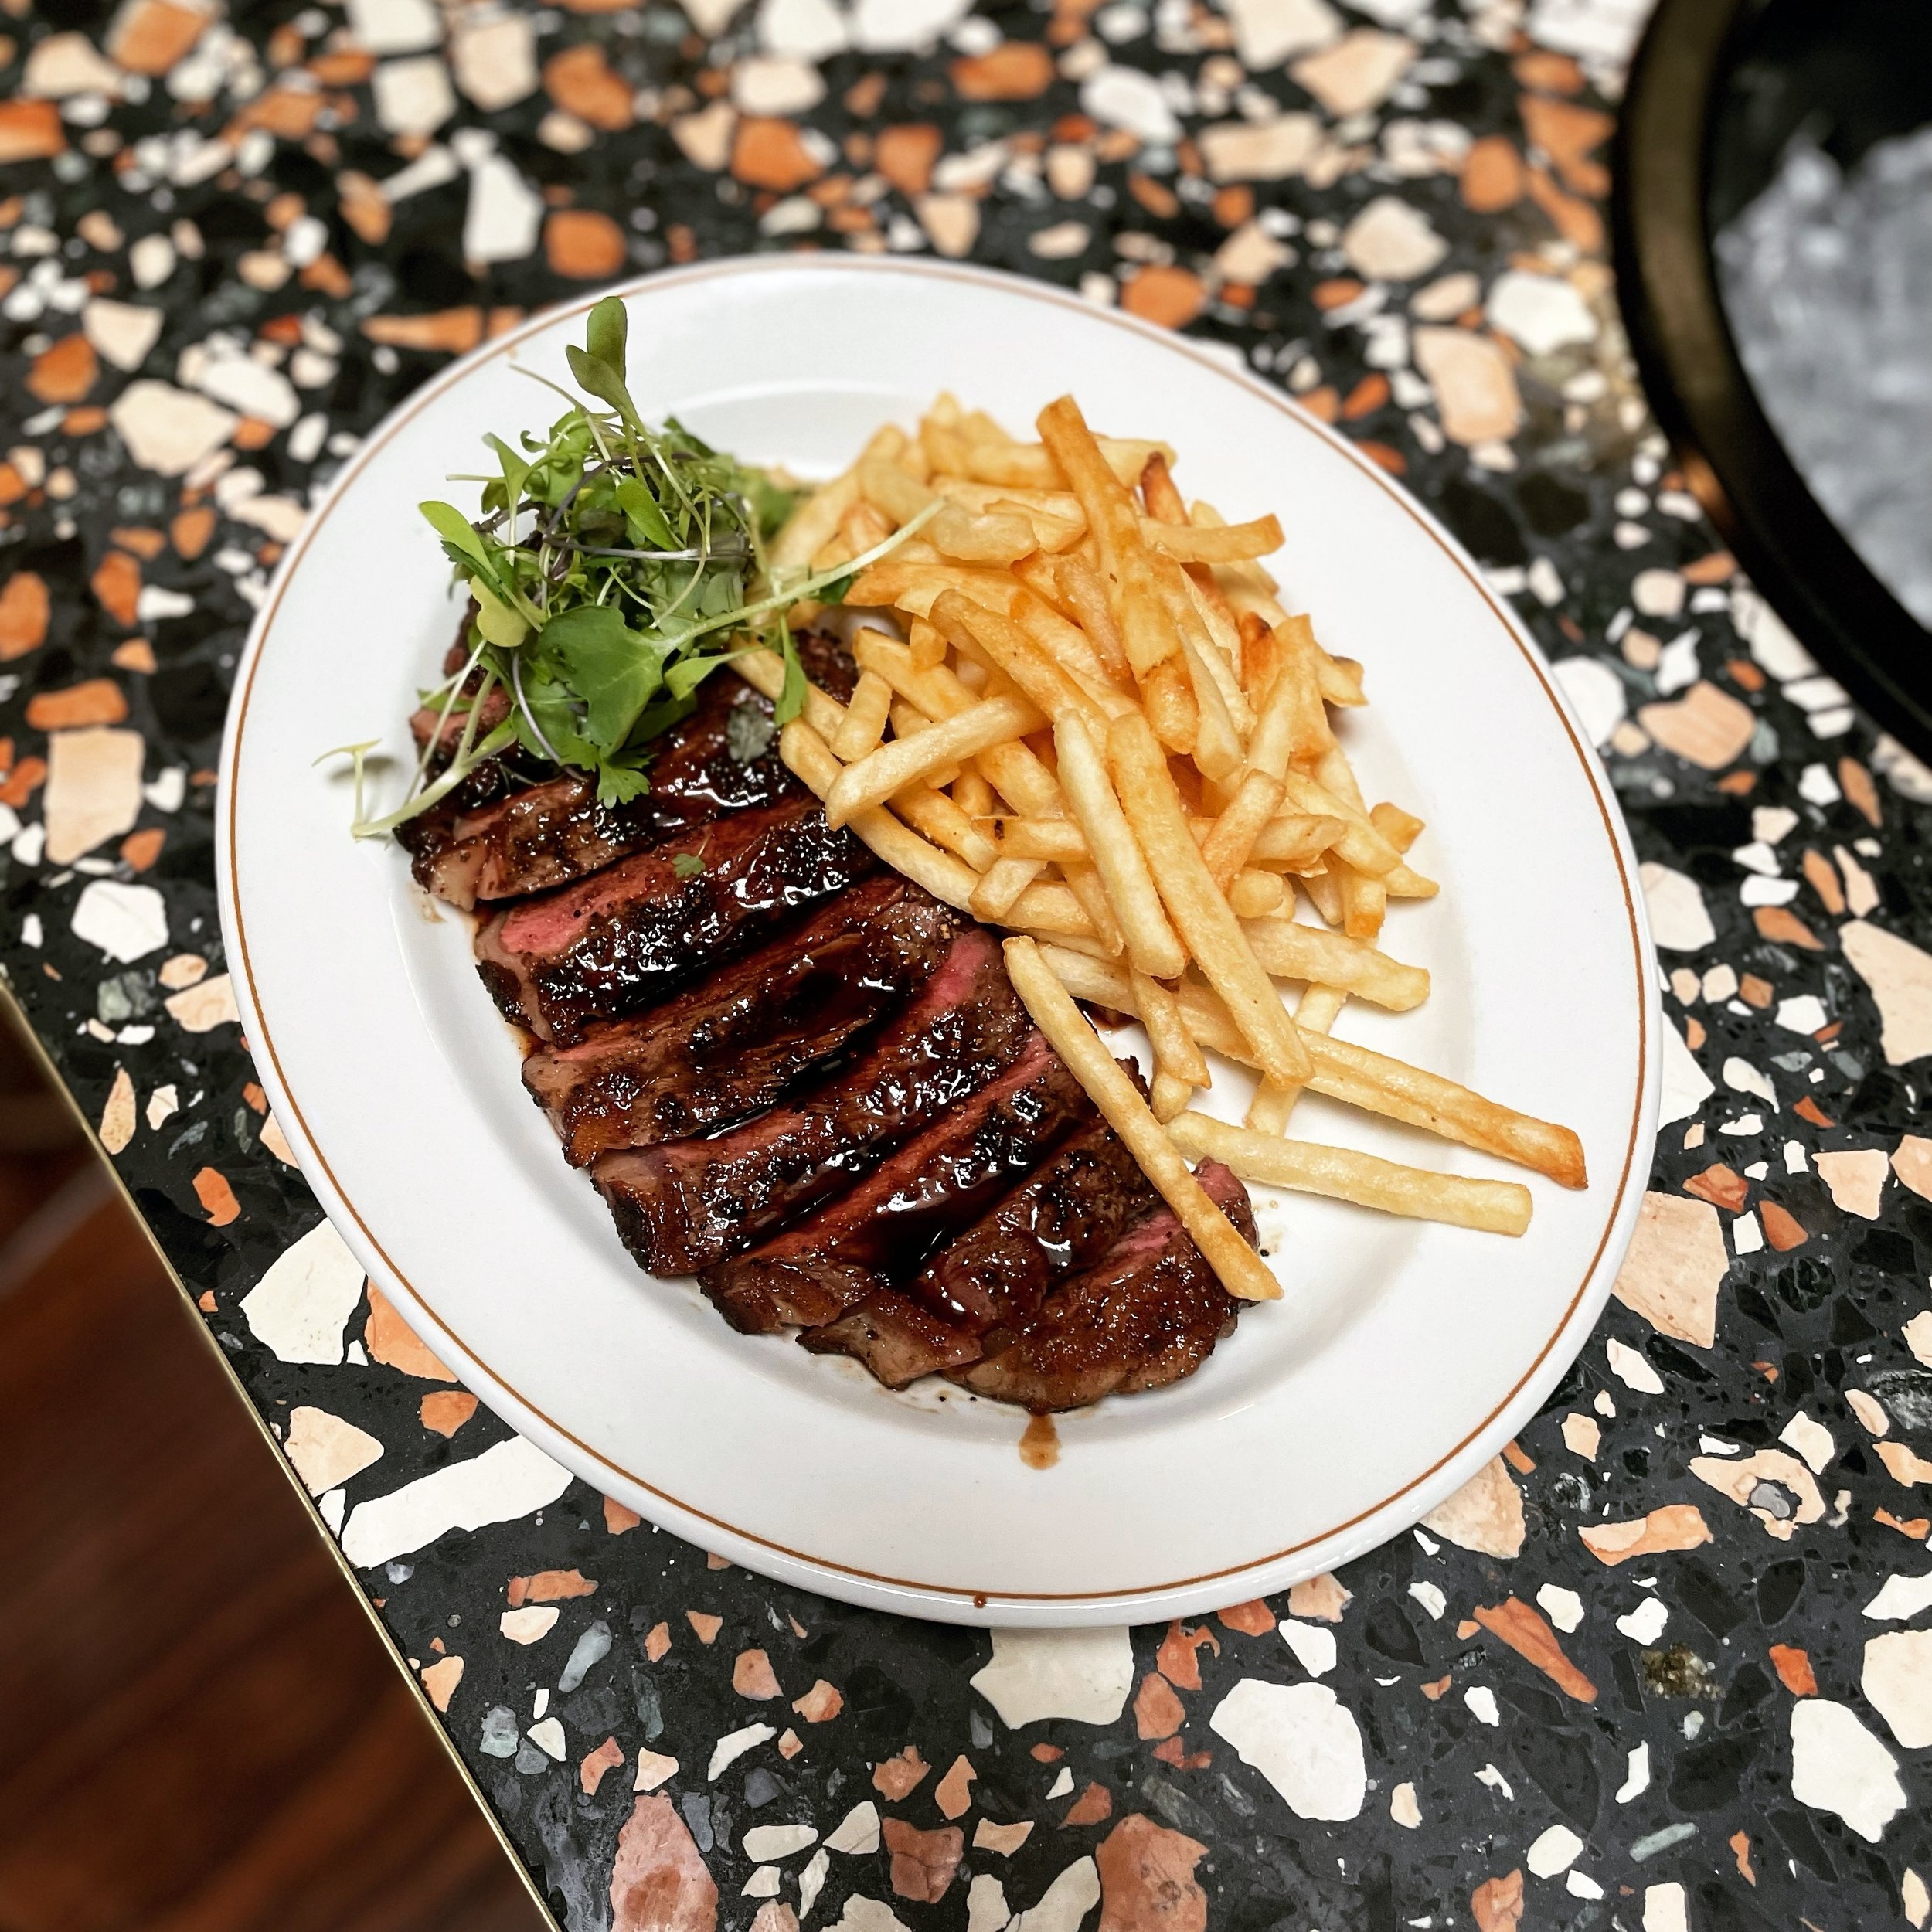 250g Porterhouse steak with red wine jus and frites
🔥🔥🔥

Unreal steak that won&rsquo;t break the bank &mdash; come and enjoy for just $32

Here for dinner today and every day until late 🦊❤️